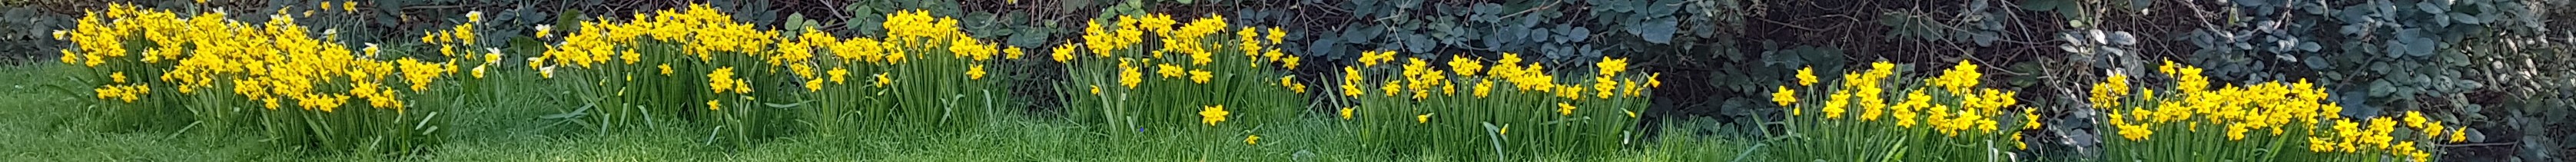 [bright yellow Tete-a-tete daffodils along the edge of a woodland, with sunlight on a grass bank]